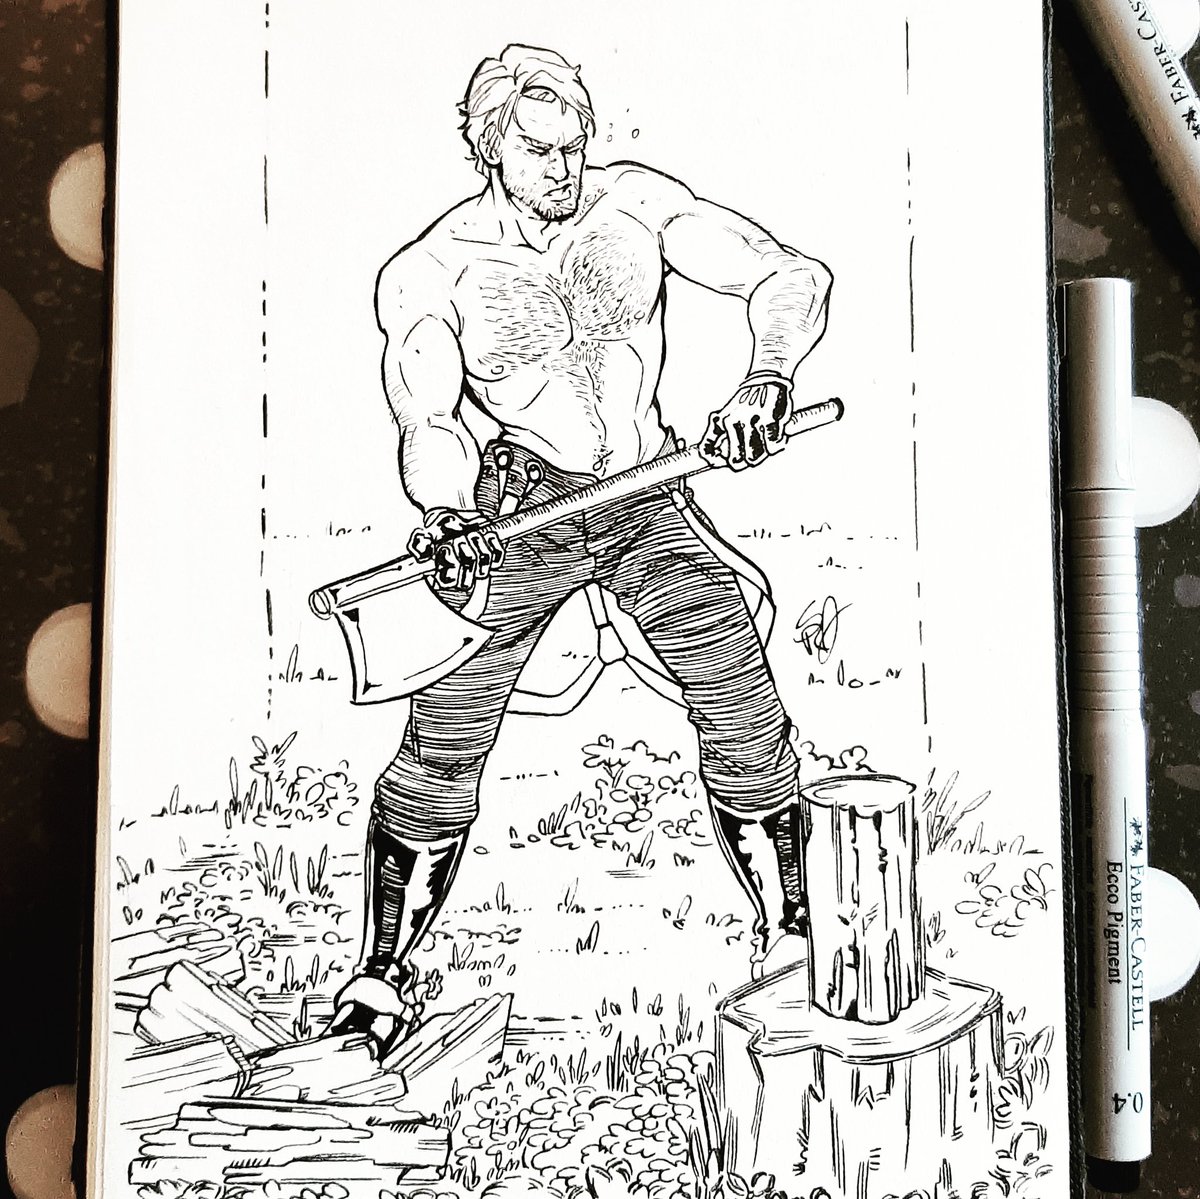 Red Inktober Redemption Day 12: Campfire.

I mean, what do you need for a campfire? Firewood!! Thank you Arthur. 
#reddeadredemption2 #rdr2 #redinktoberredemption #rdr2inktober #inktober2019 #inktober #arthurmorgan 